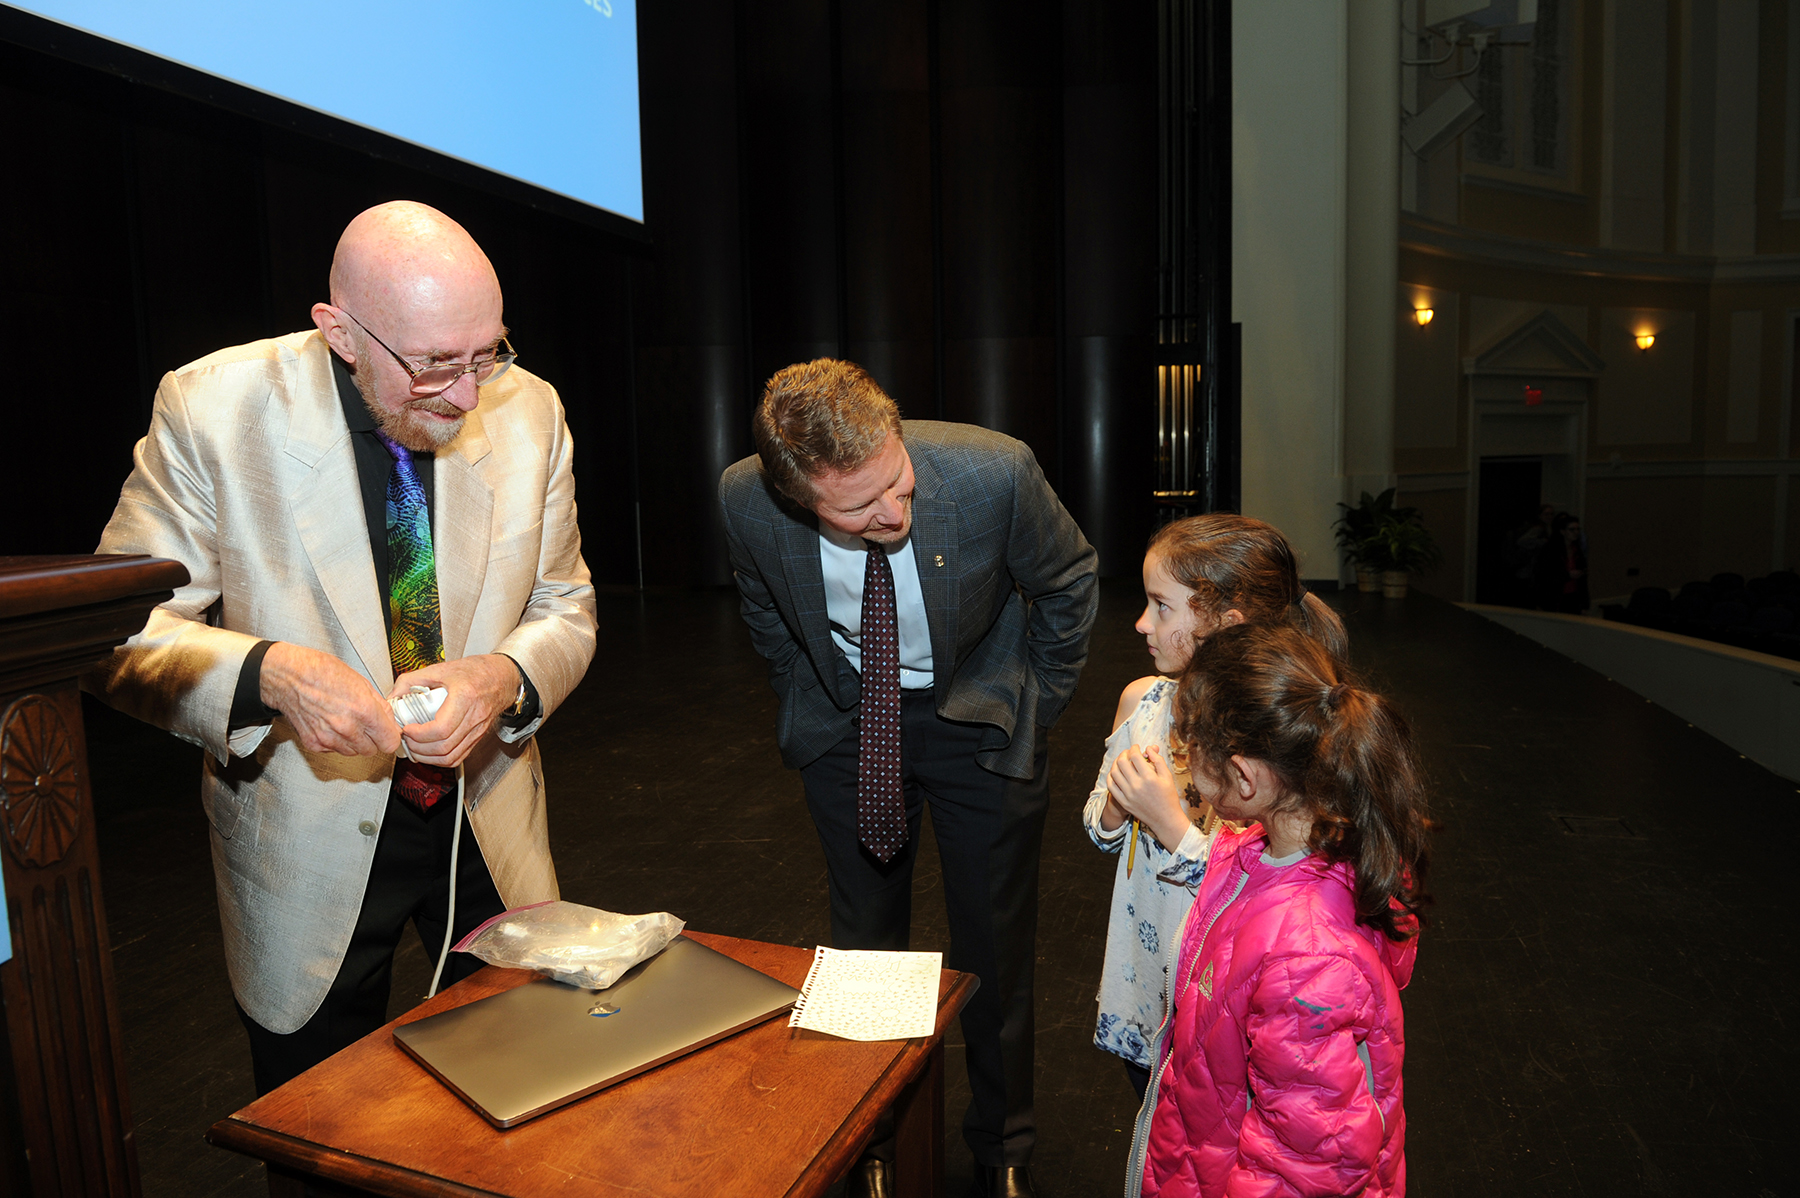 Thorne (left) and Interim Chancellor Kevin M. Guskiewicz talk with young attendees after the talk. (photo by Donn Youn